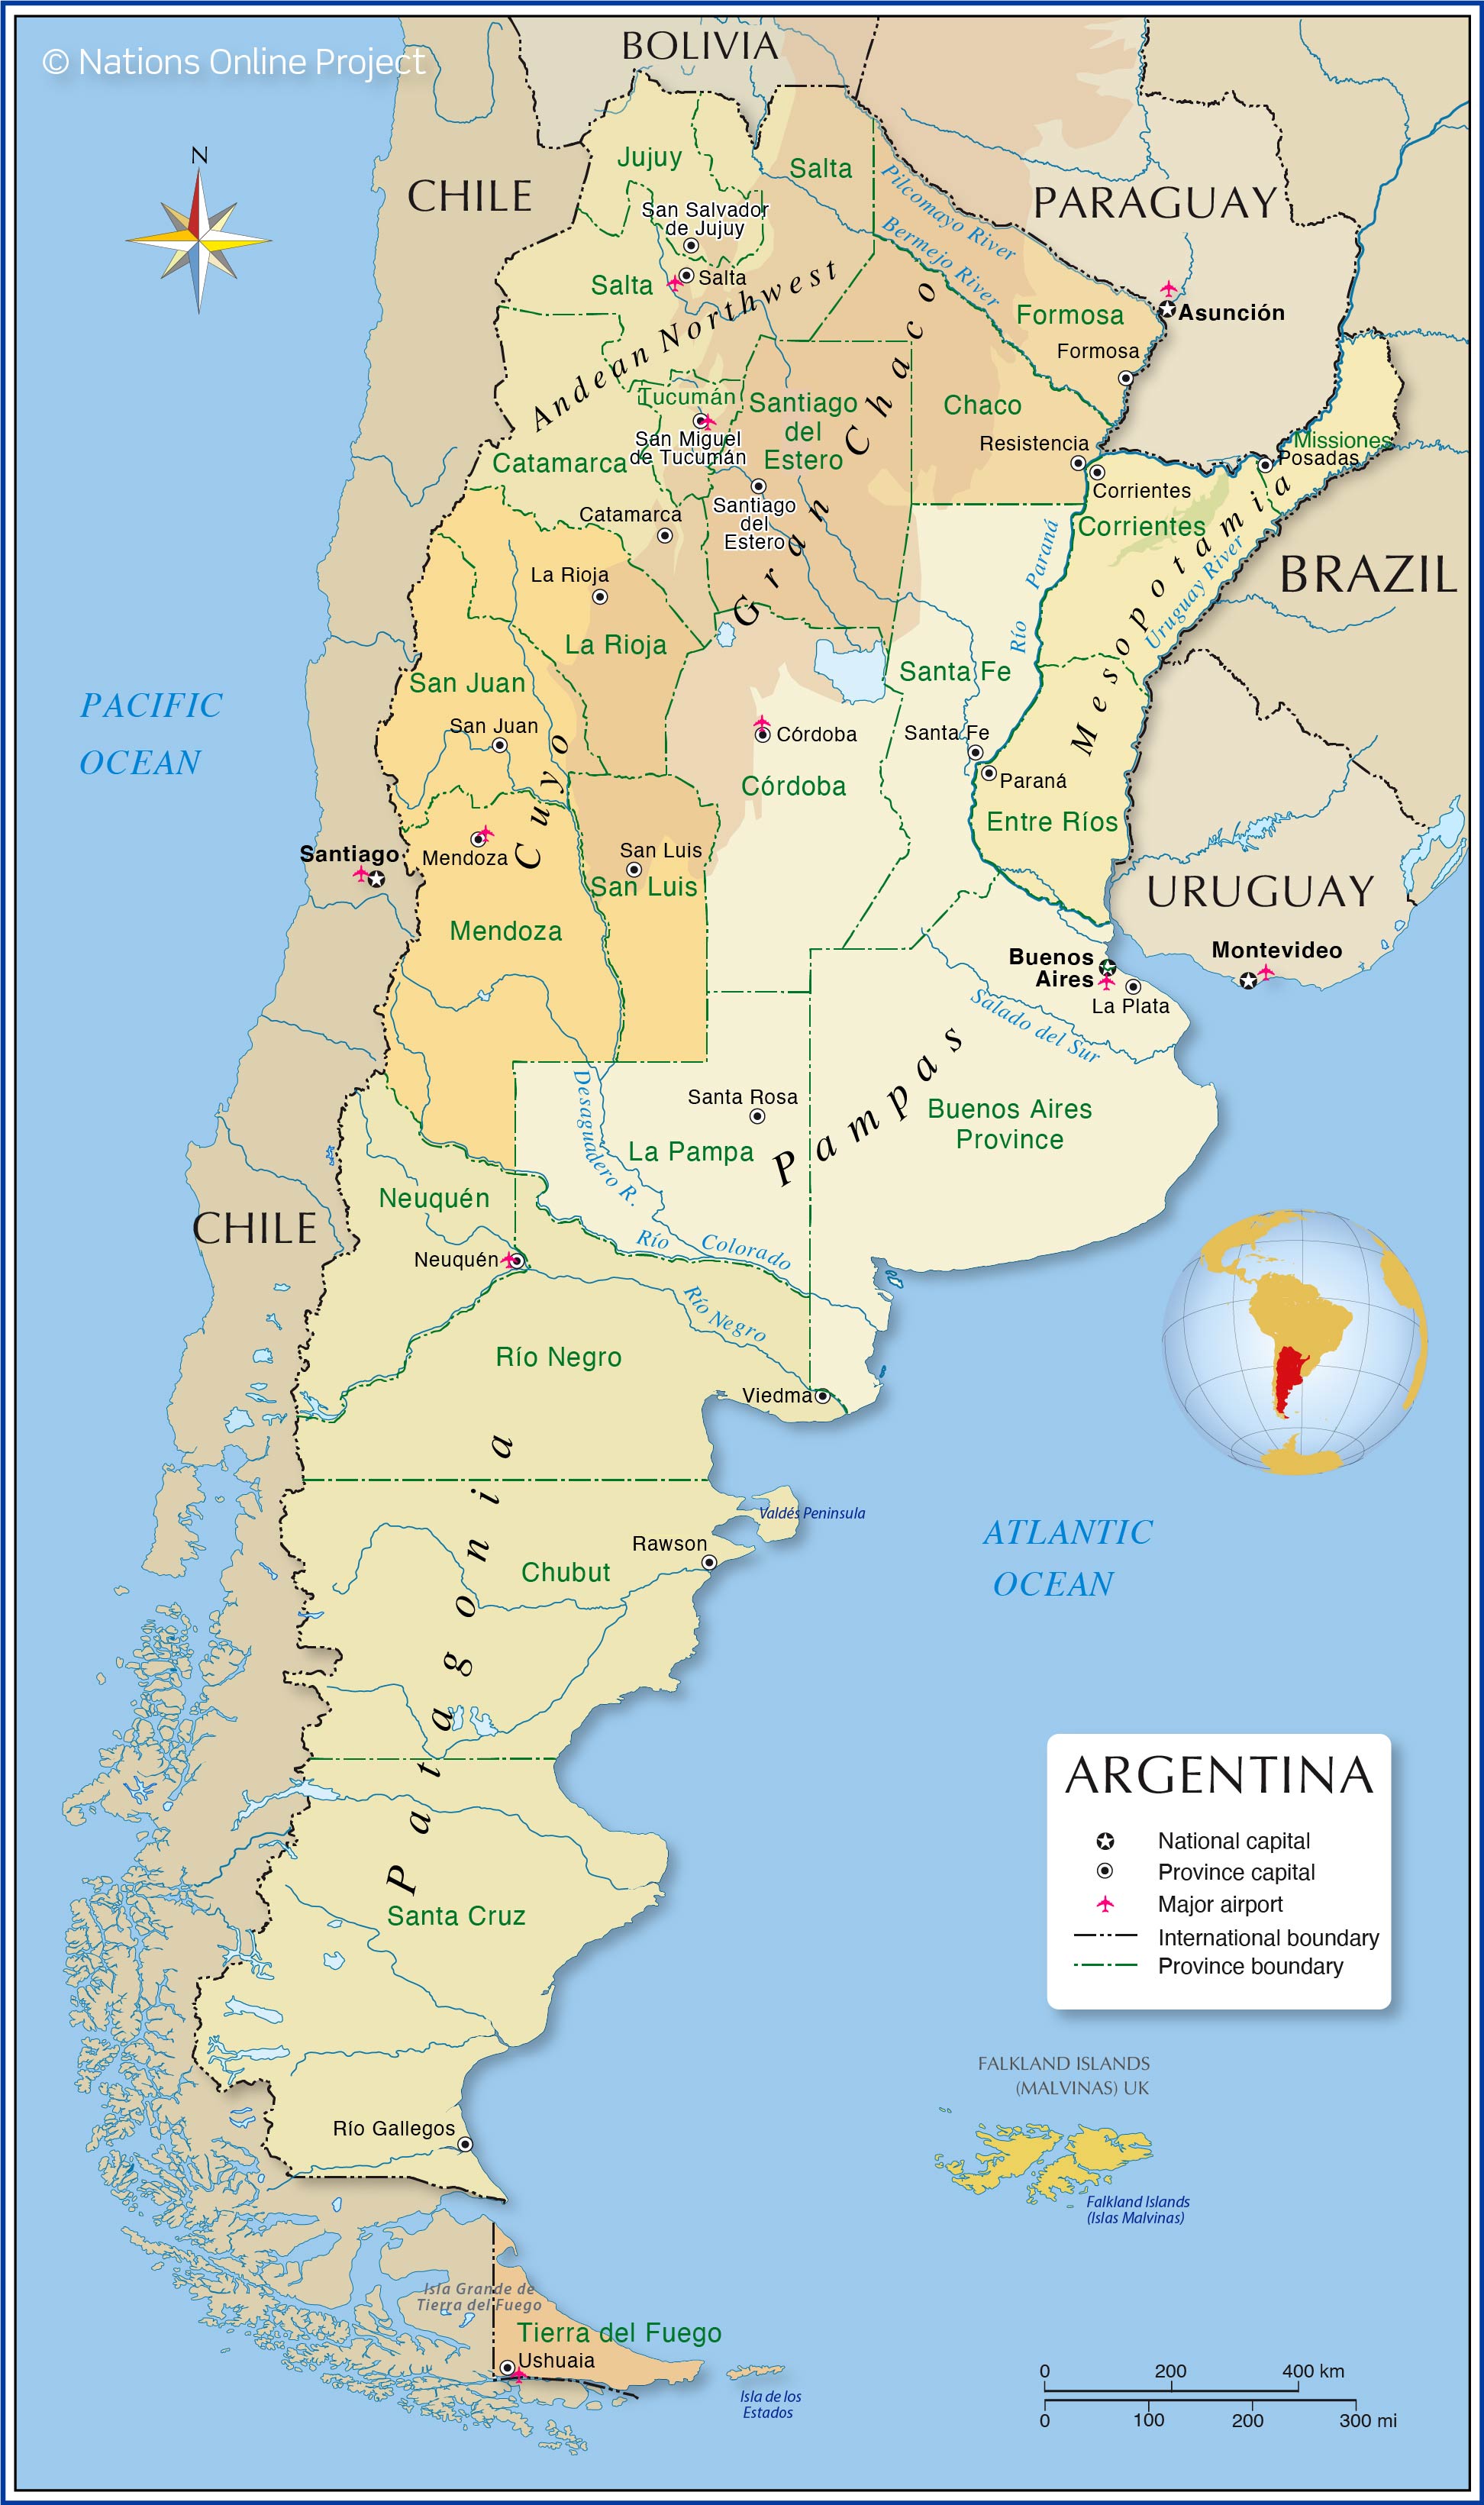 The Administrative Map of Argentina shows provinces, province capitals and natural regions of Argentina